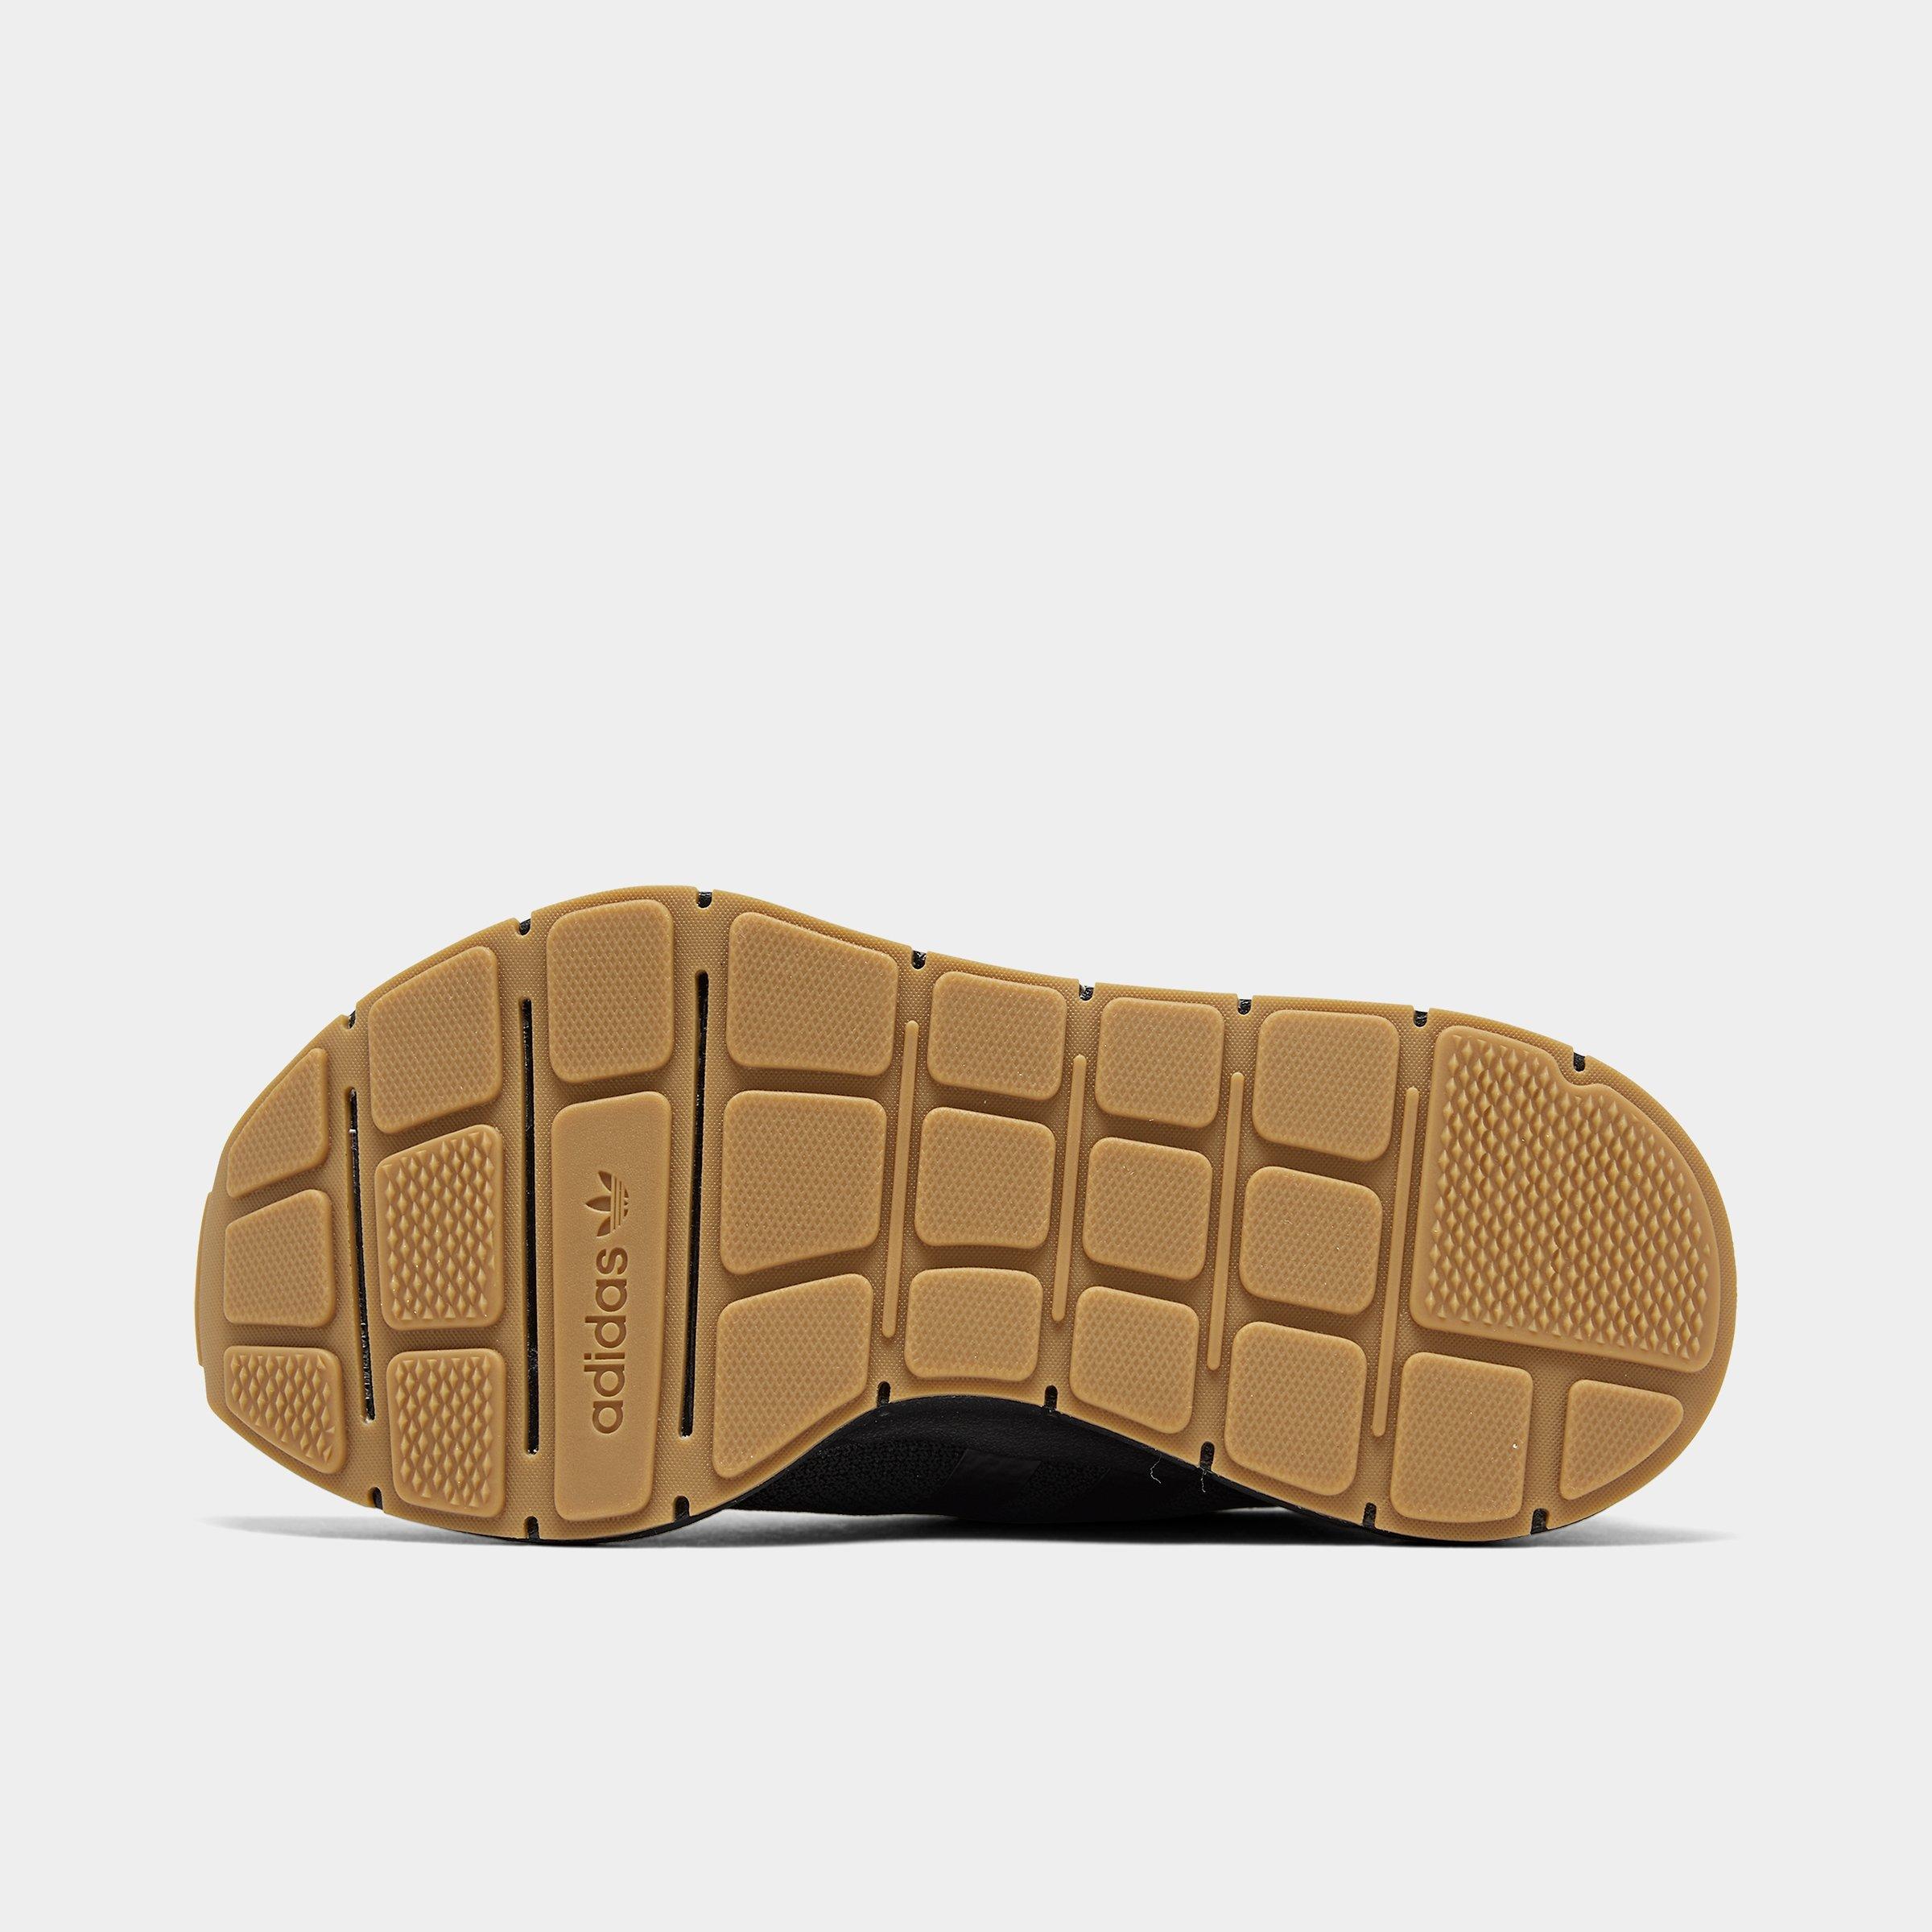 adidas brown sports shoes